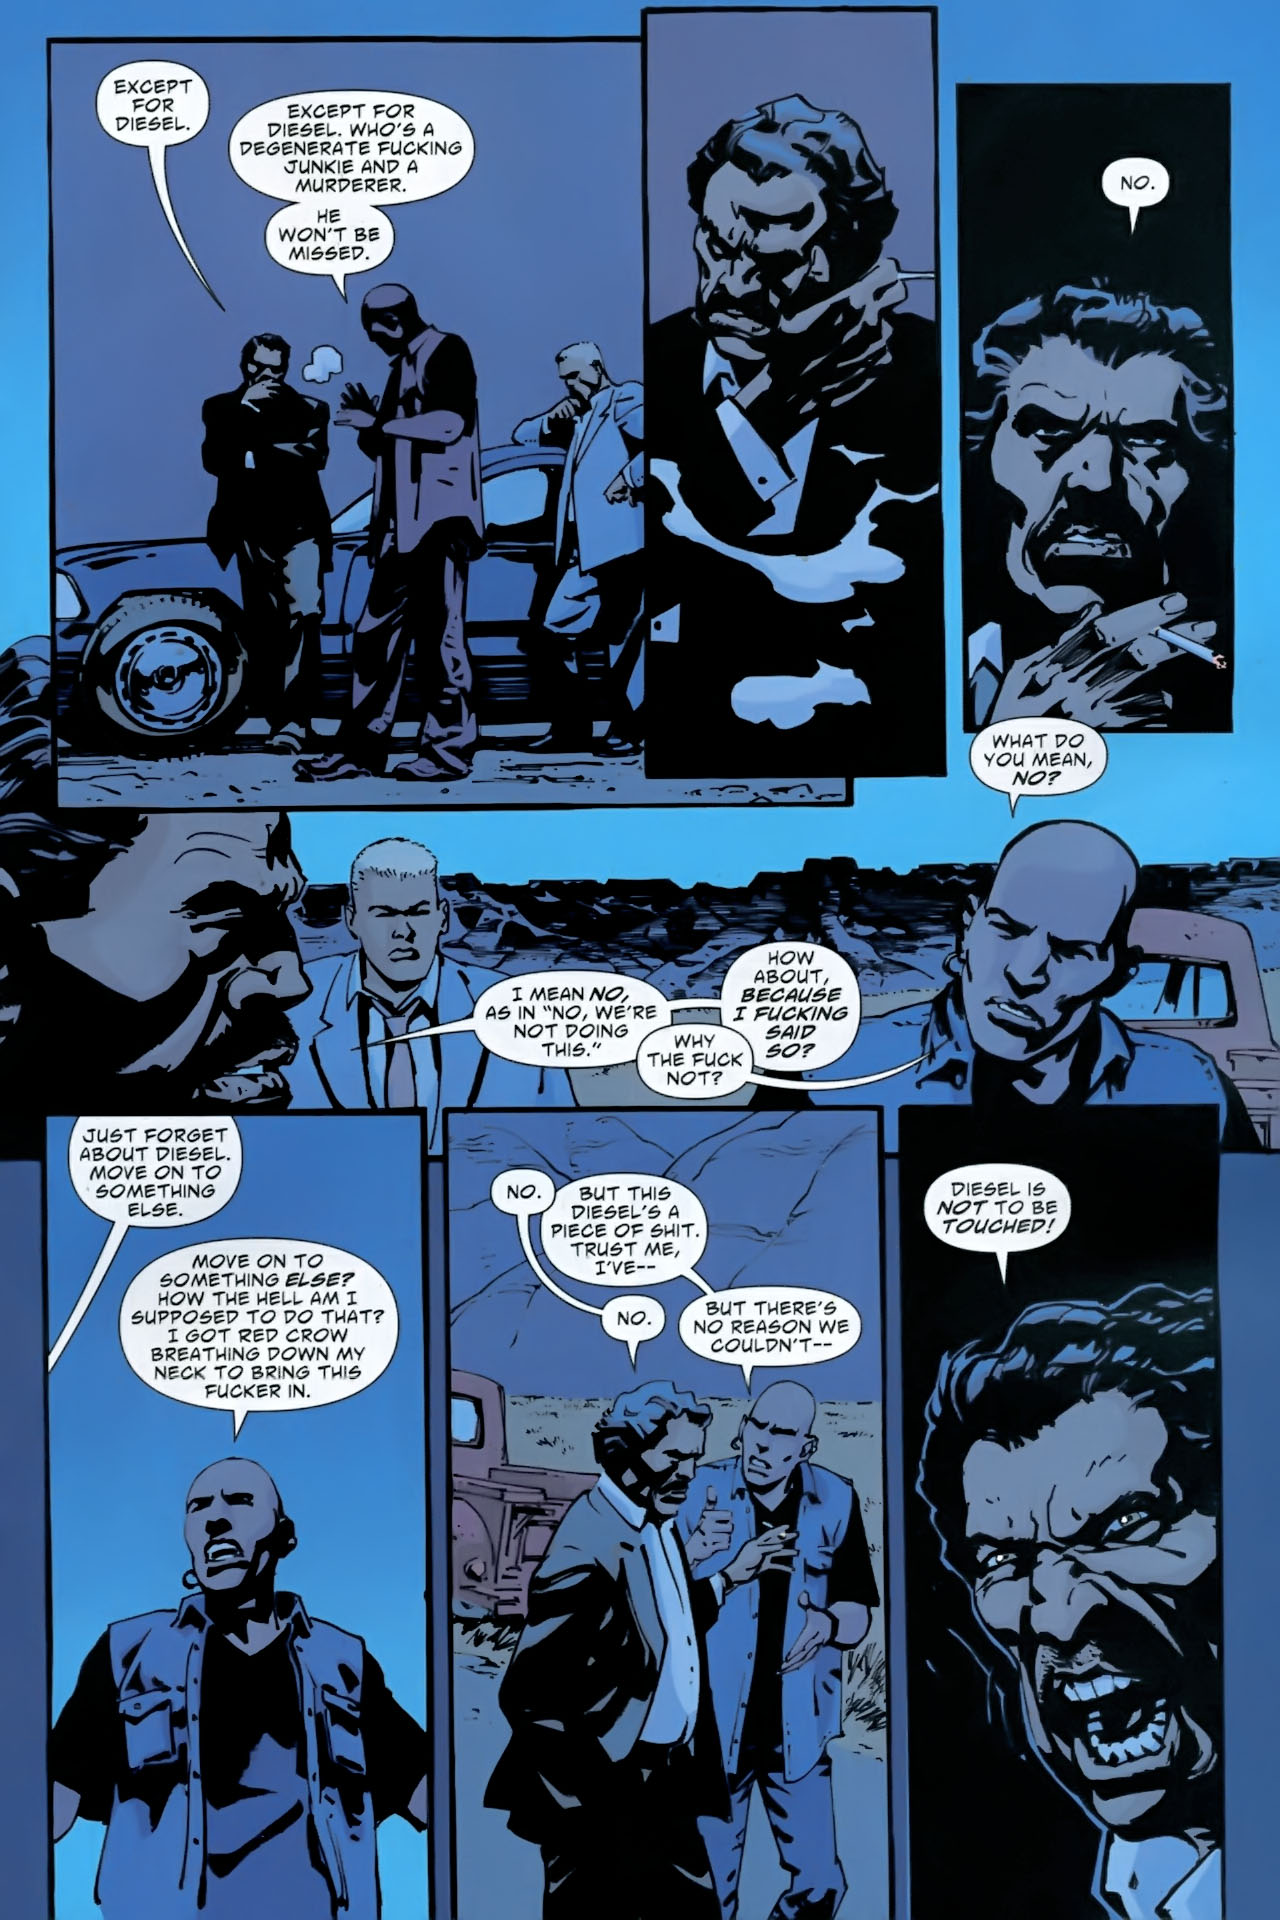 Scalped #14 - Dead Mothers, Part 2 of 5 